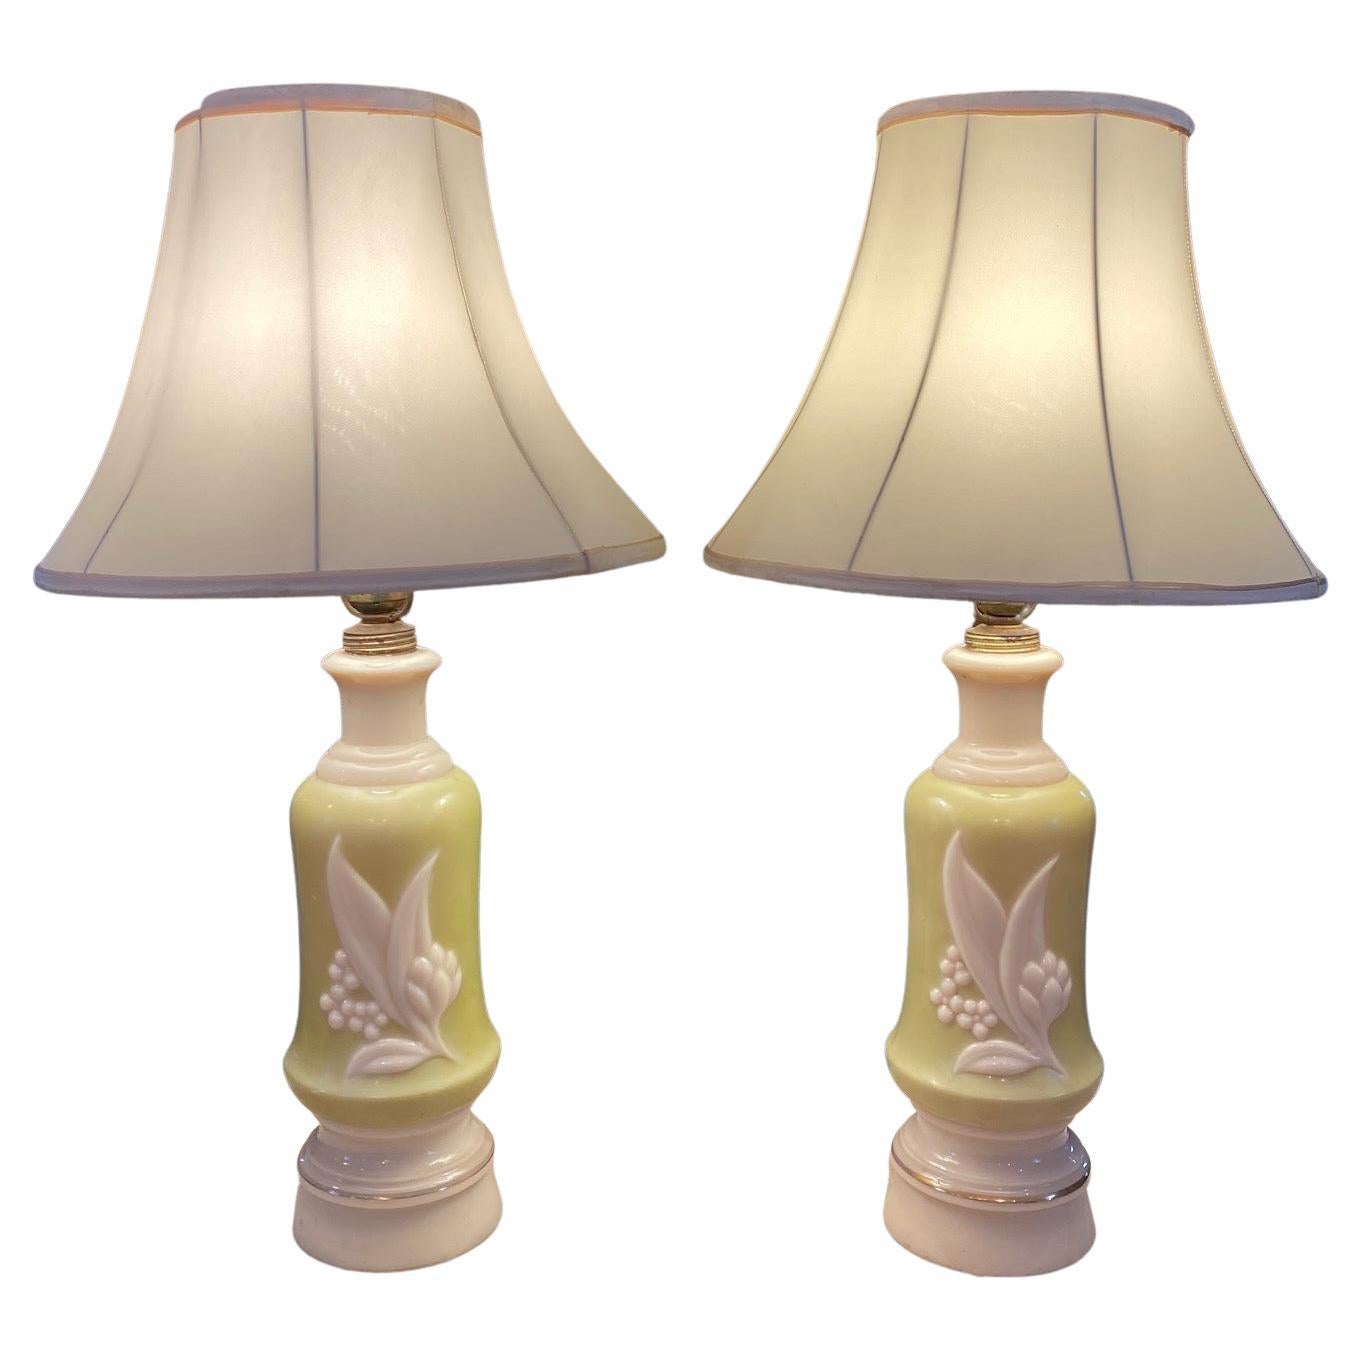 Charming Pair of Vintage Aladin Molded Glass Table Lamps